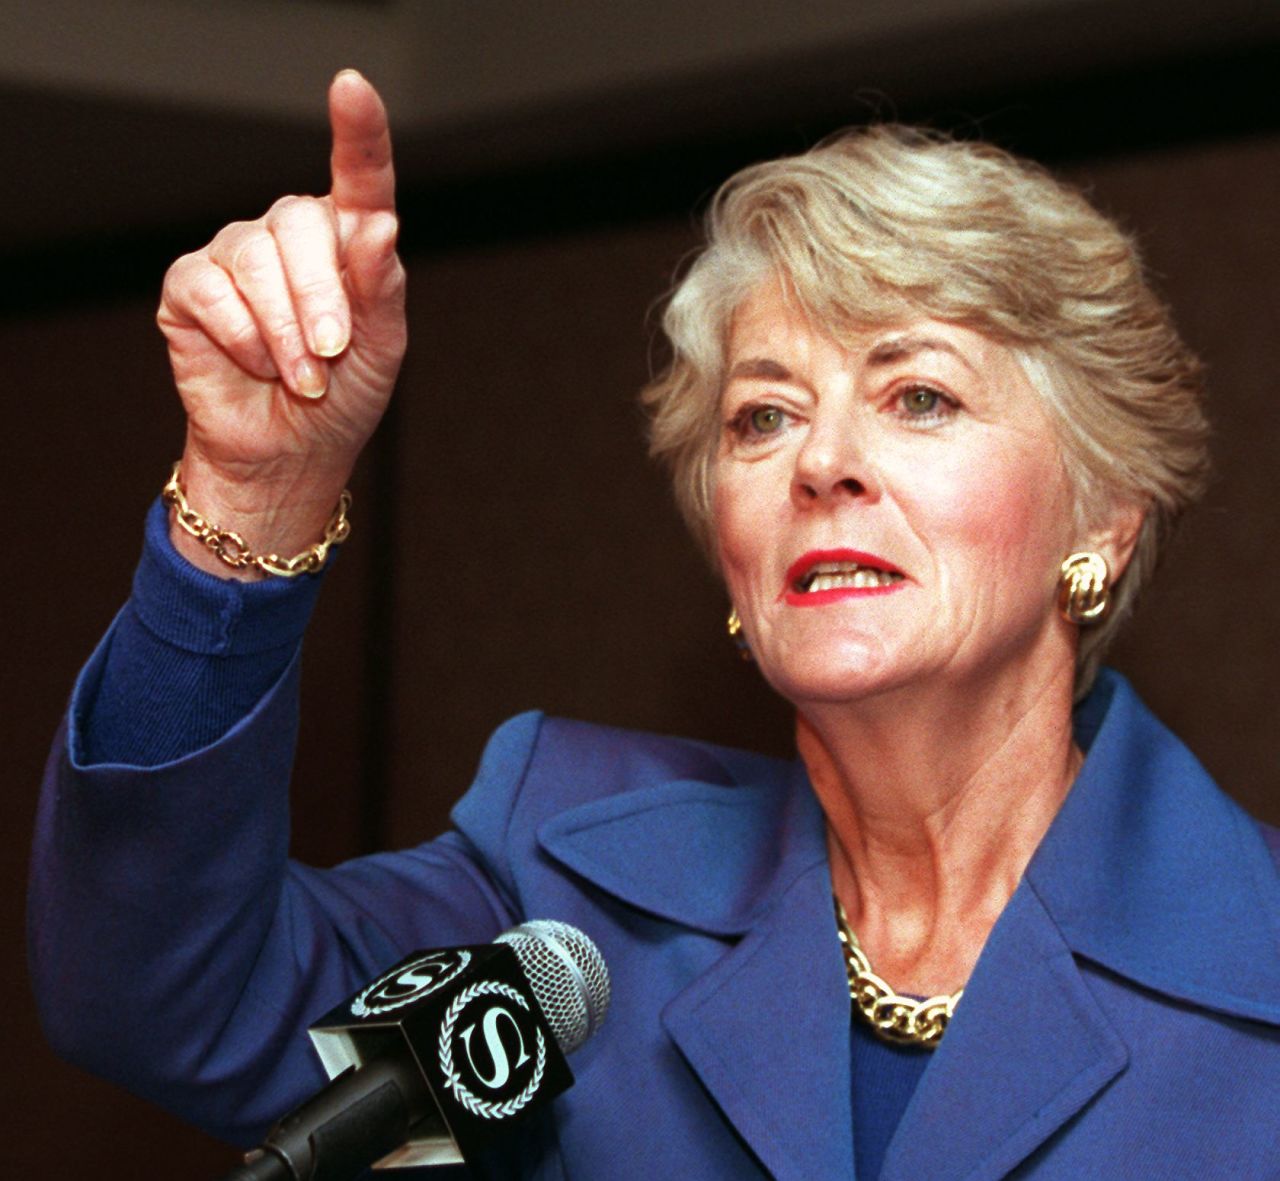 In 1984, Geraldine Ferraro became the first woman to run on a major party's national ticket. She was Walter Mondale's running mate.